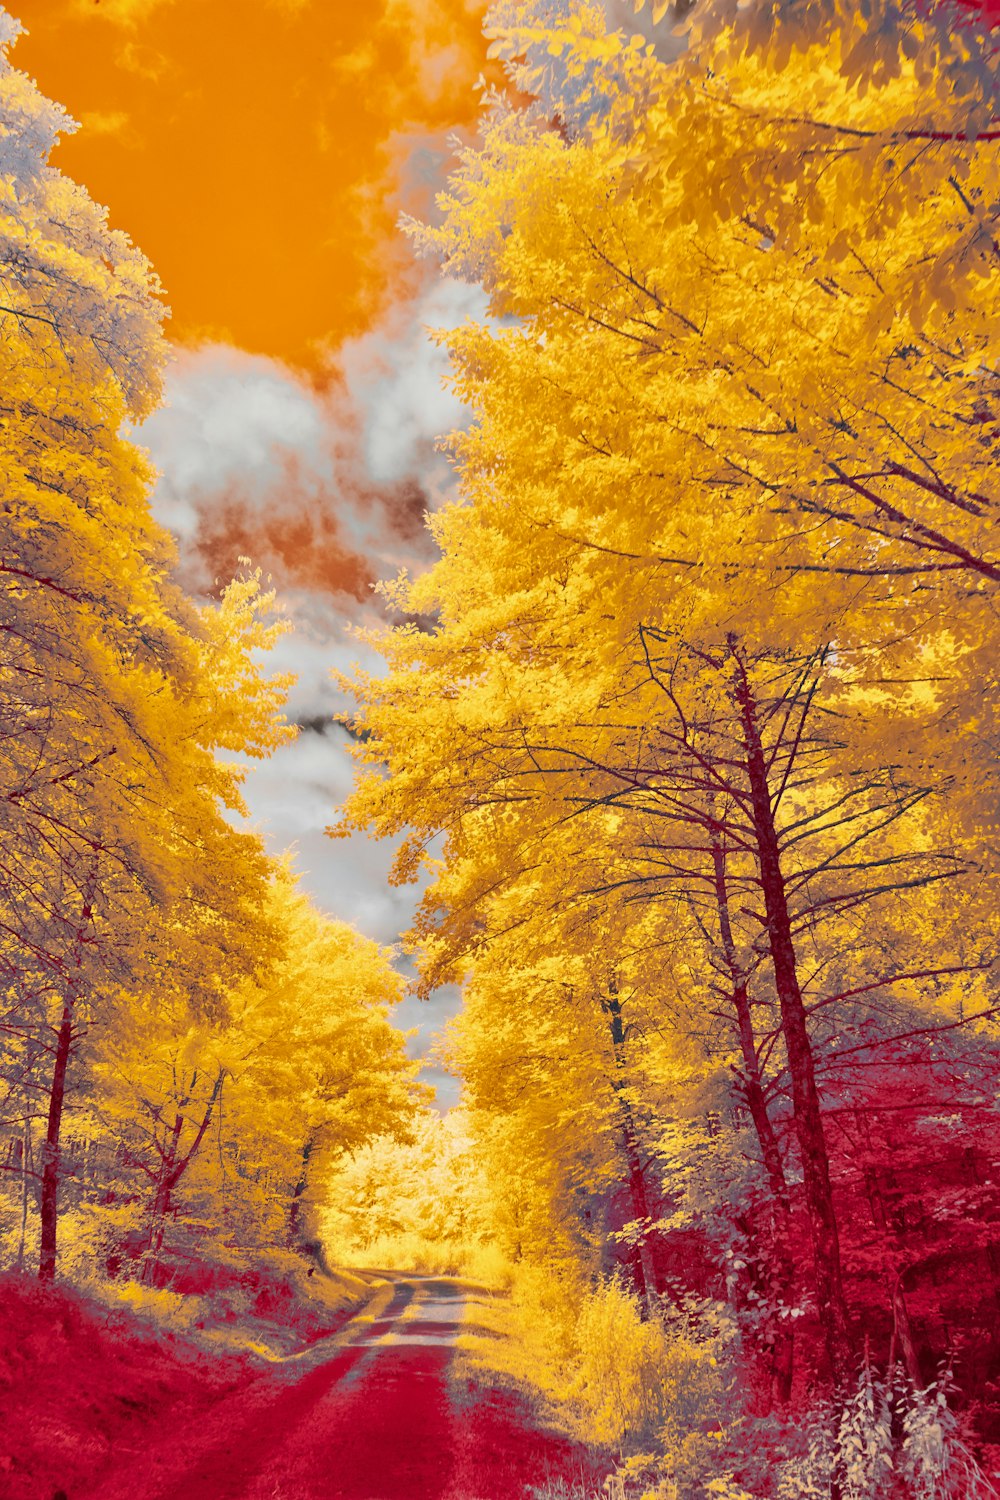 yellow and red trees under white clouds and blue sky during daytime